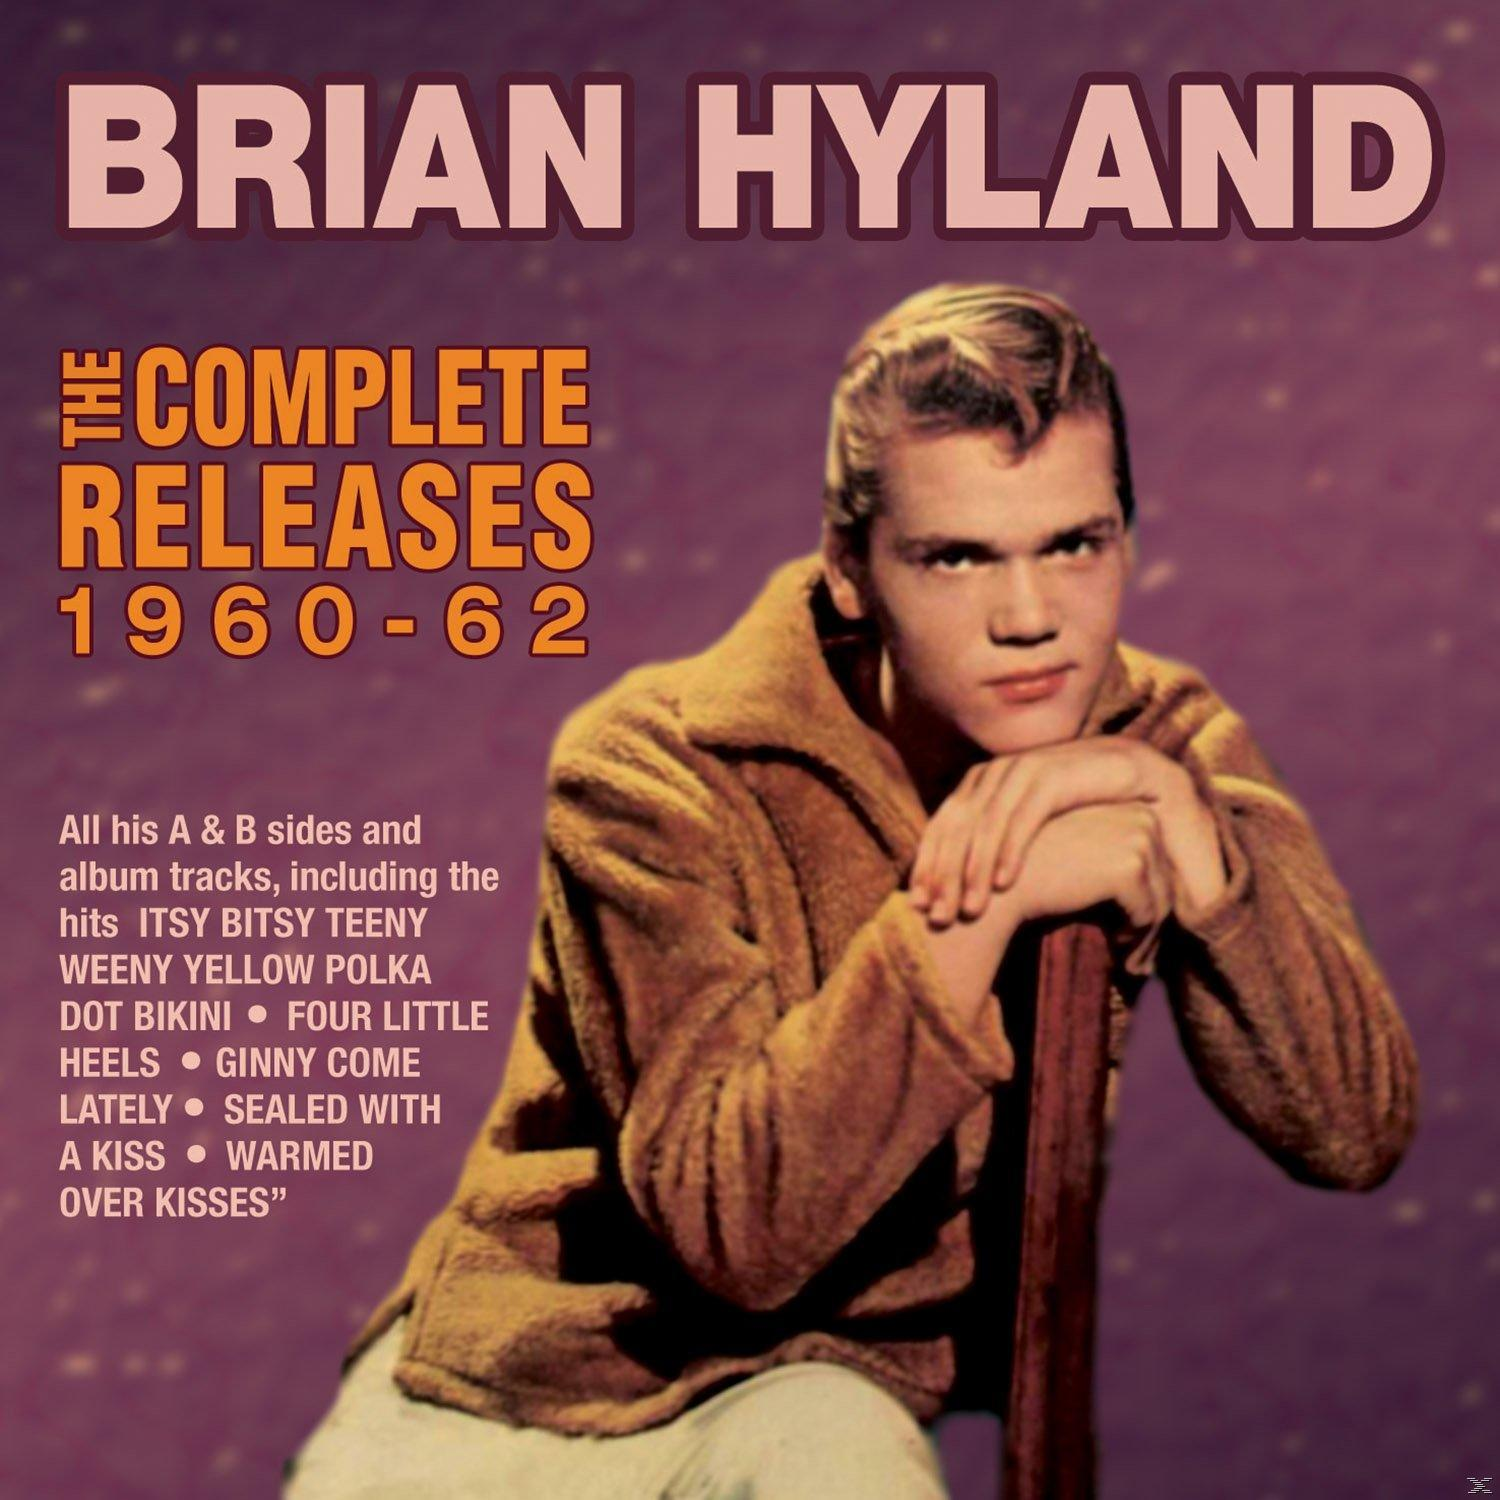 Brian Hyland - The Complete Releases - 1960-62 (CD)